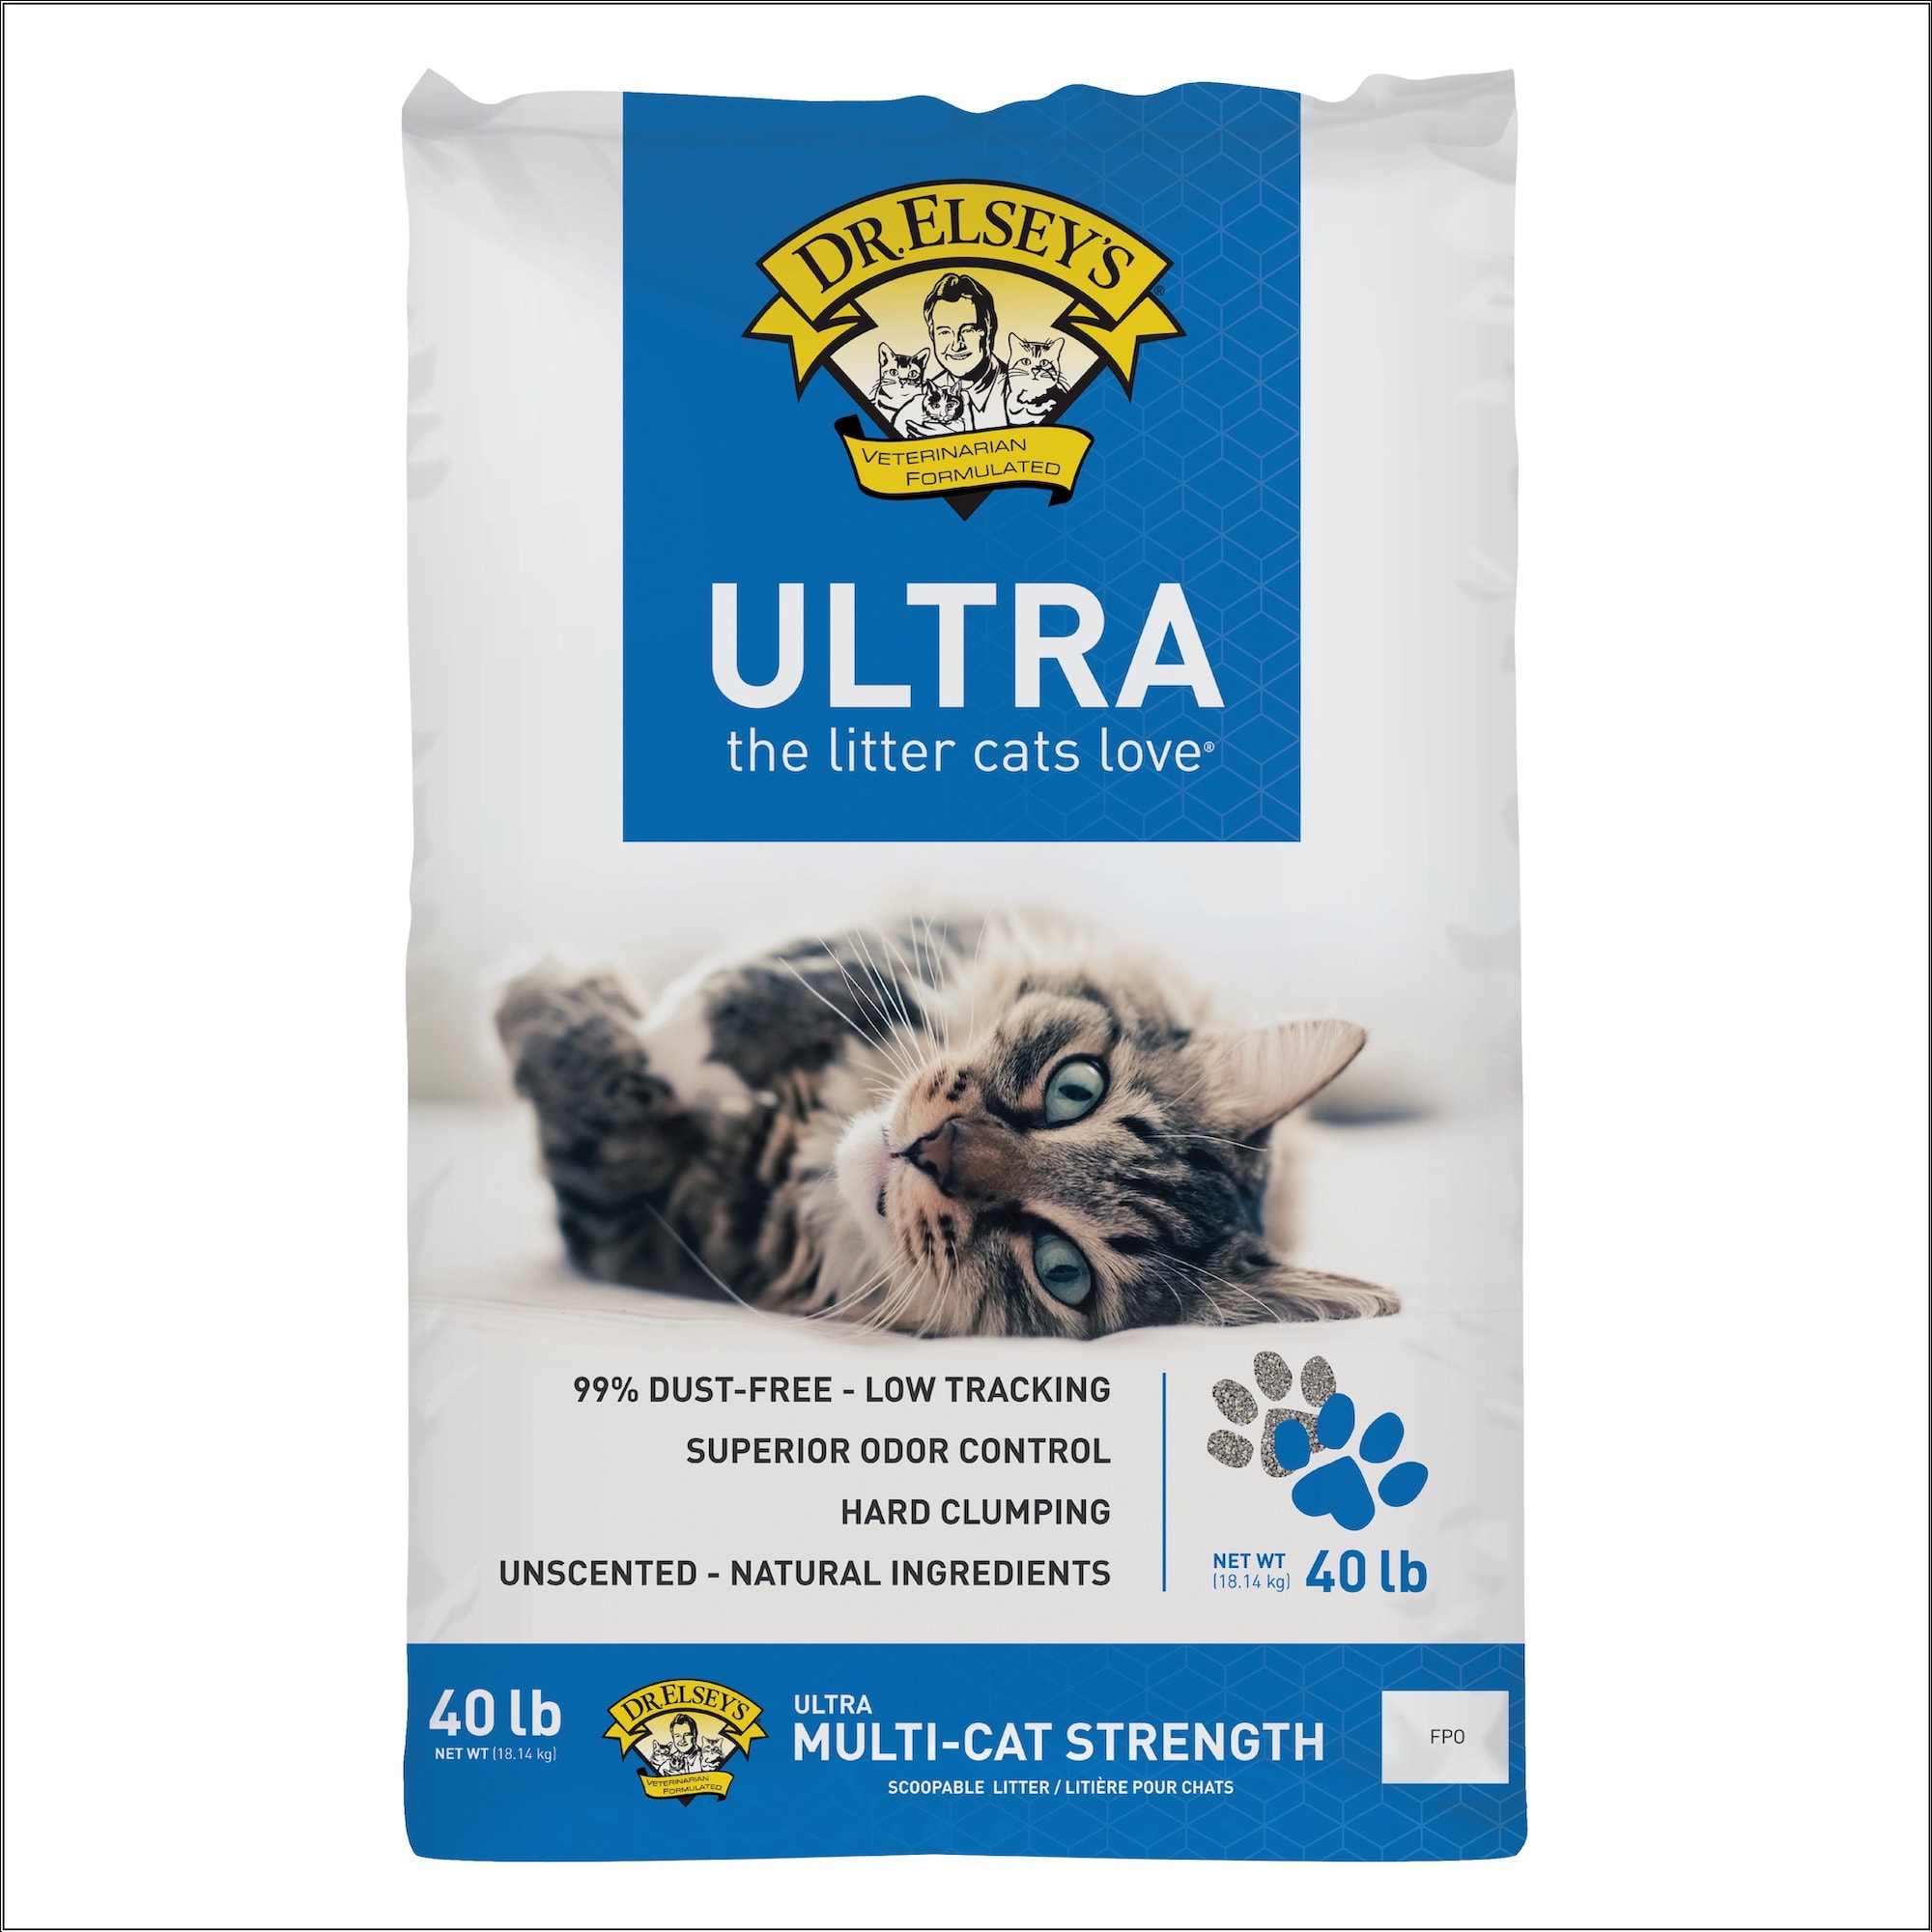 Photos - Cat Litter Box / Tray Dr. Elsey's Dr. Elsey's Ultra Clumping Clay Multi-Cat Litter, 40 lbs., 40